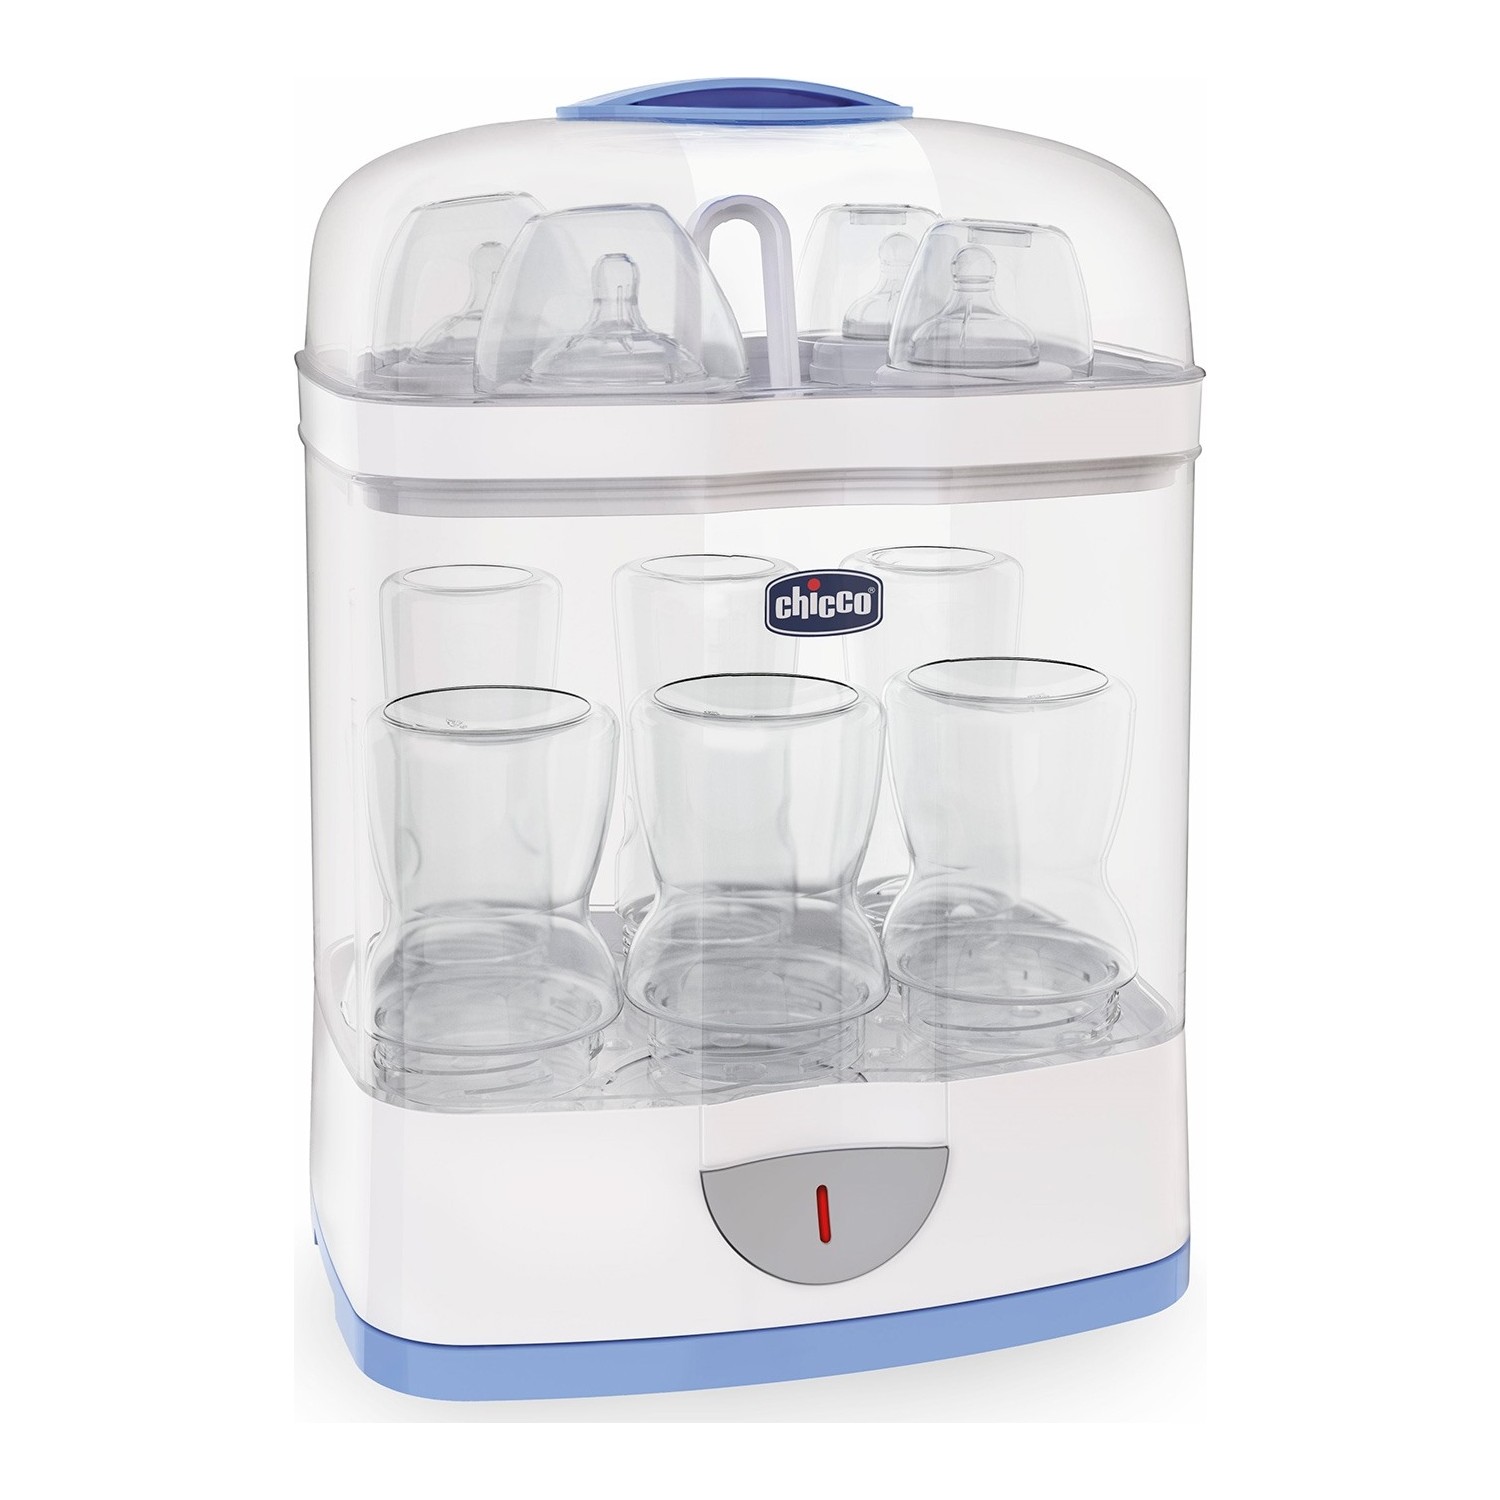 Chicco Chicco 2-in-1 Dampfsterilisiergerät 00007392000000 